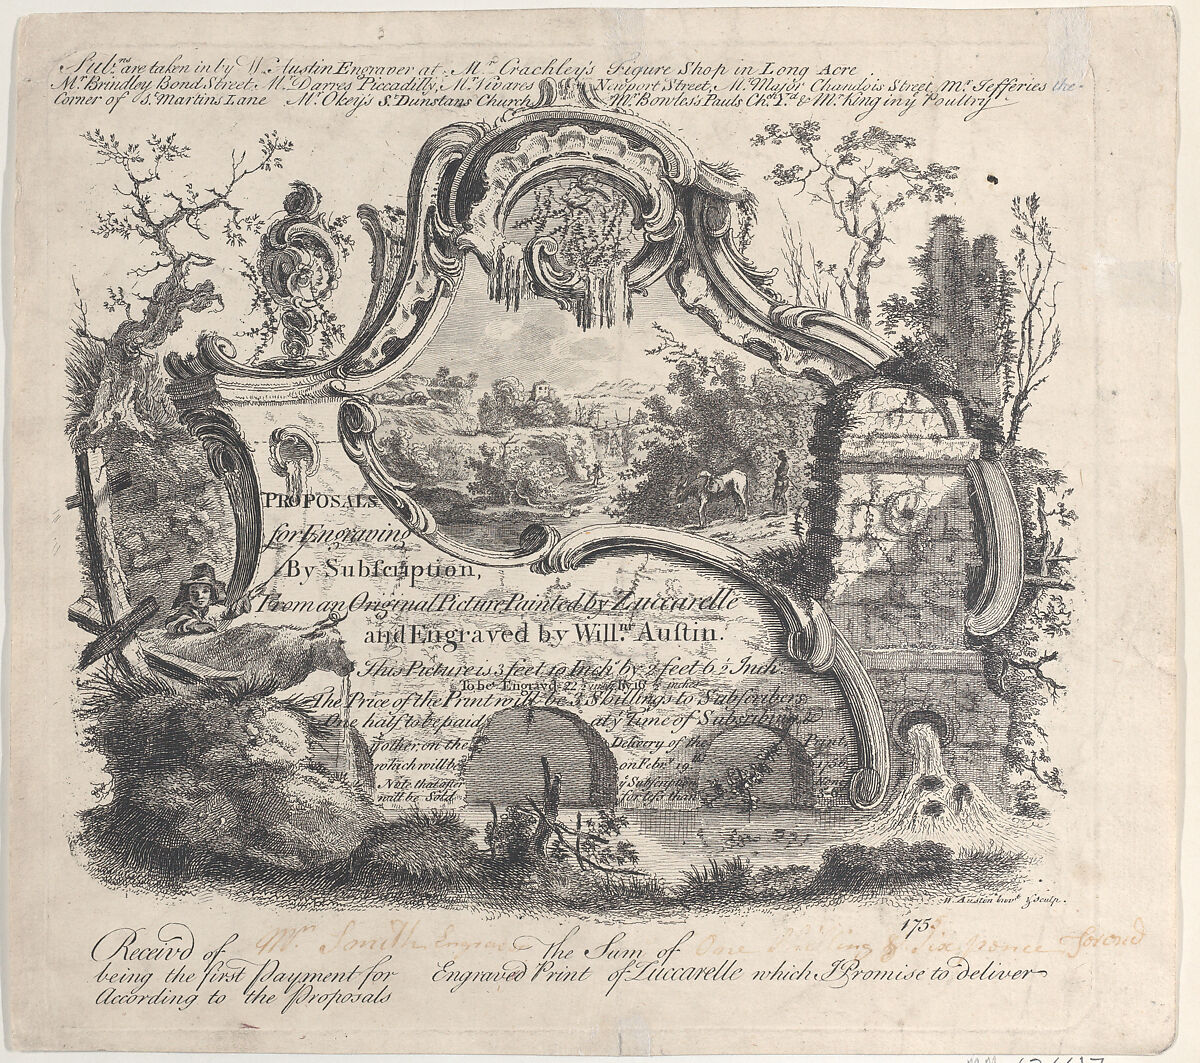 Proposal for Engraving by Subscription From an Original Picture Painted by Zuccarelle, William Austin (British, London 1721/33–1820 Brighton), Engraving 